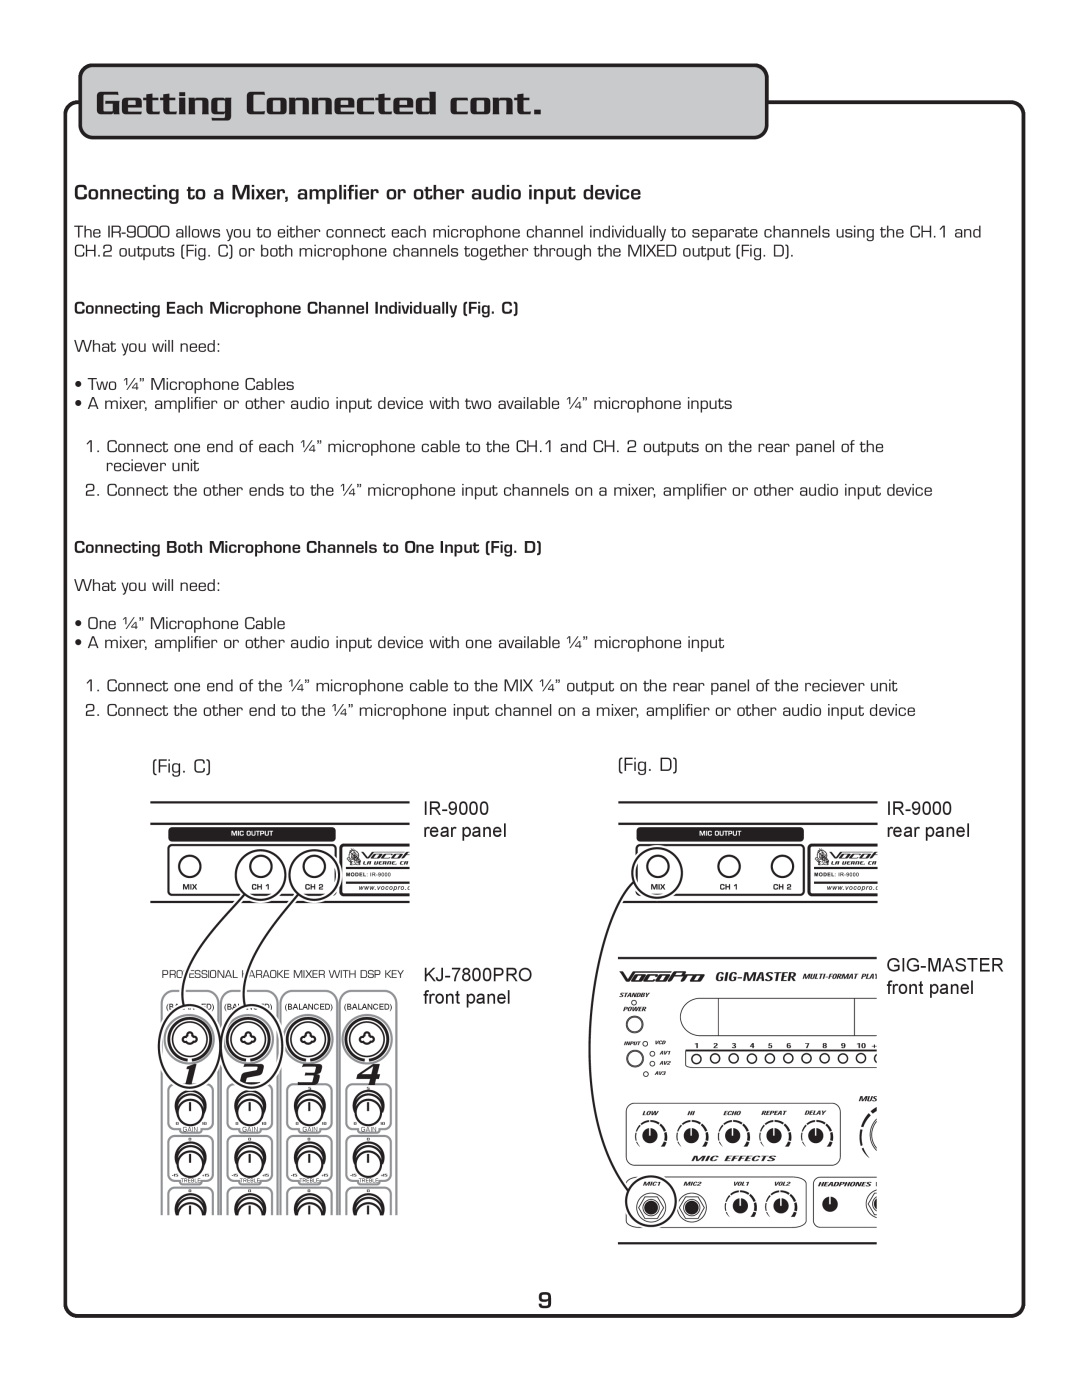 VocoPro IR-9000 owner manual Getting Connected cont, rear panel, KJ-7800PRO, Gig-Master, front panel, Fig. C, Fig. D 